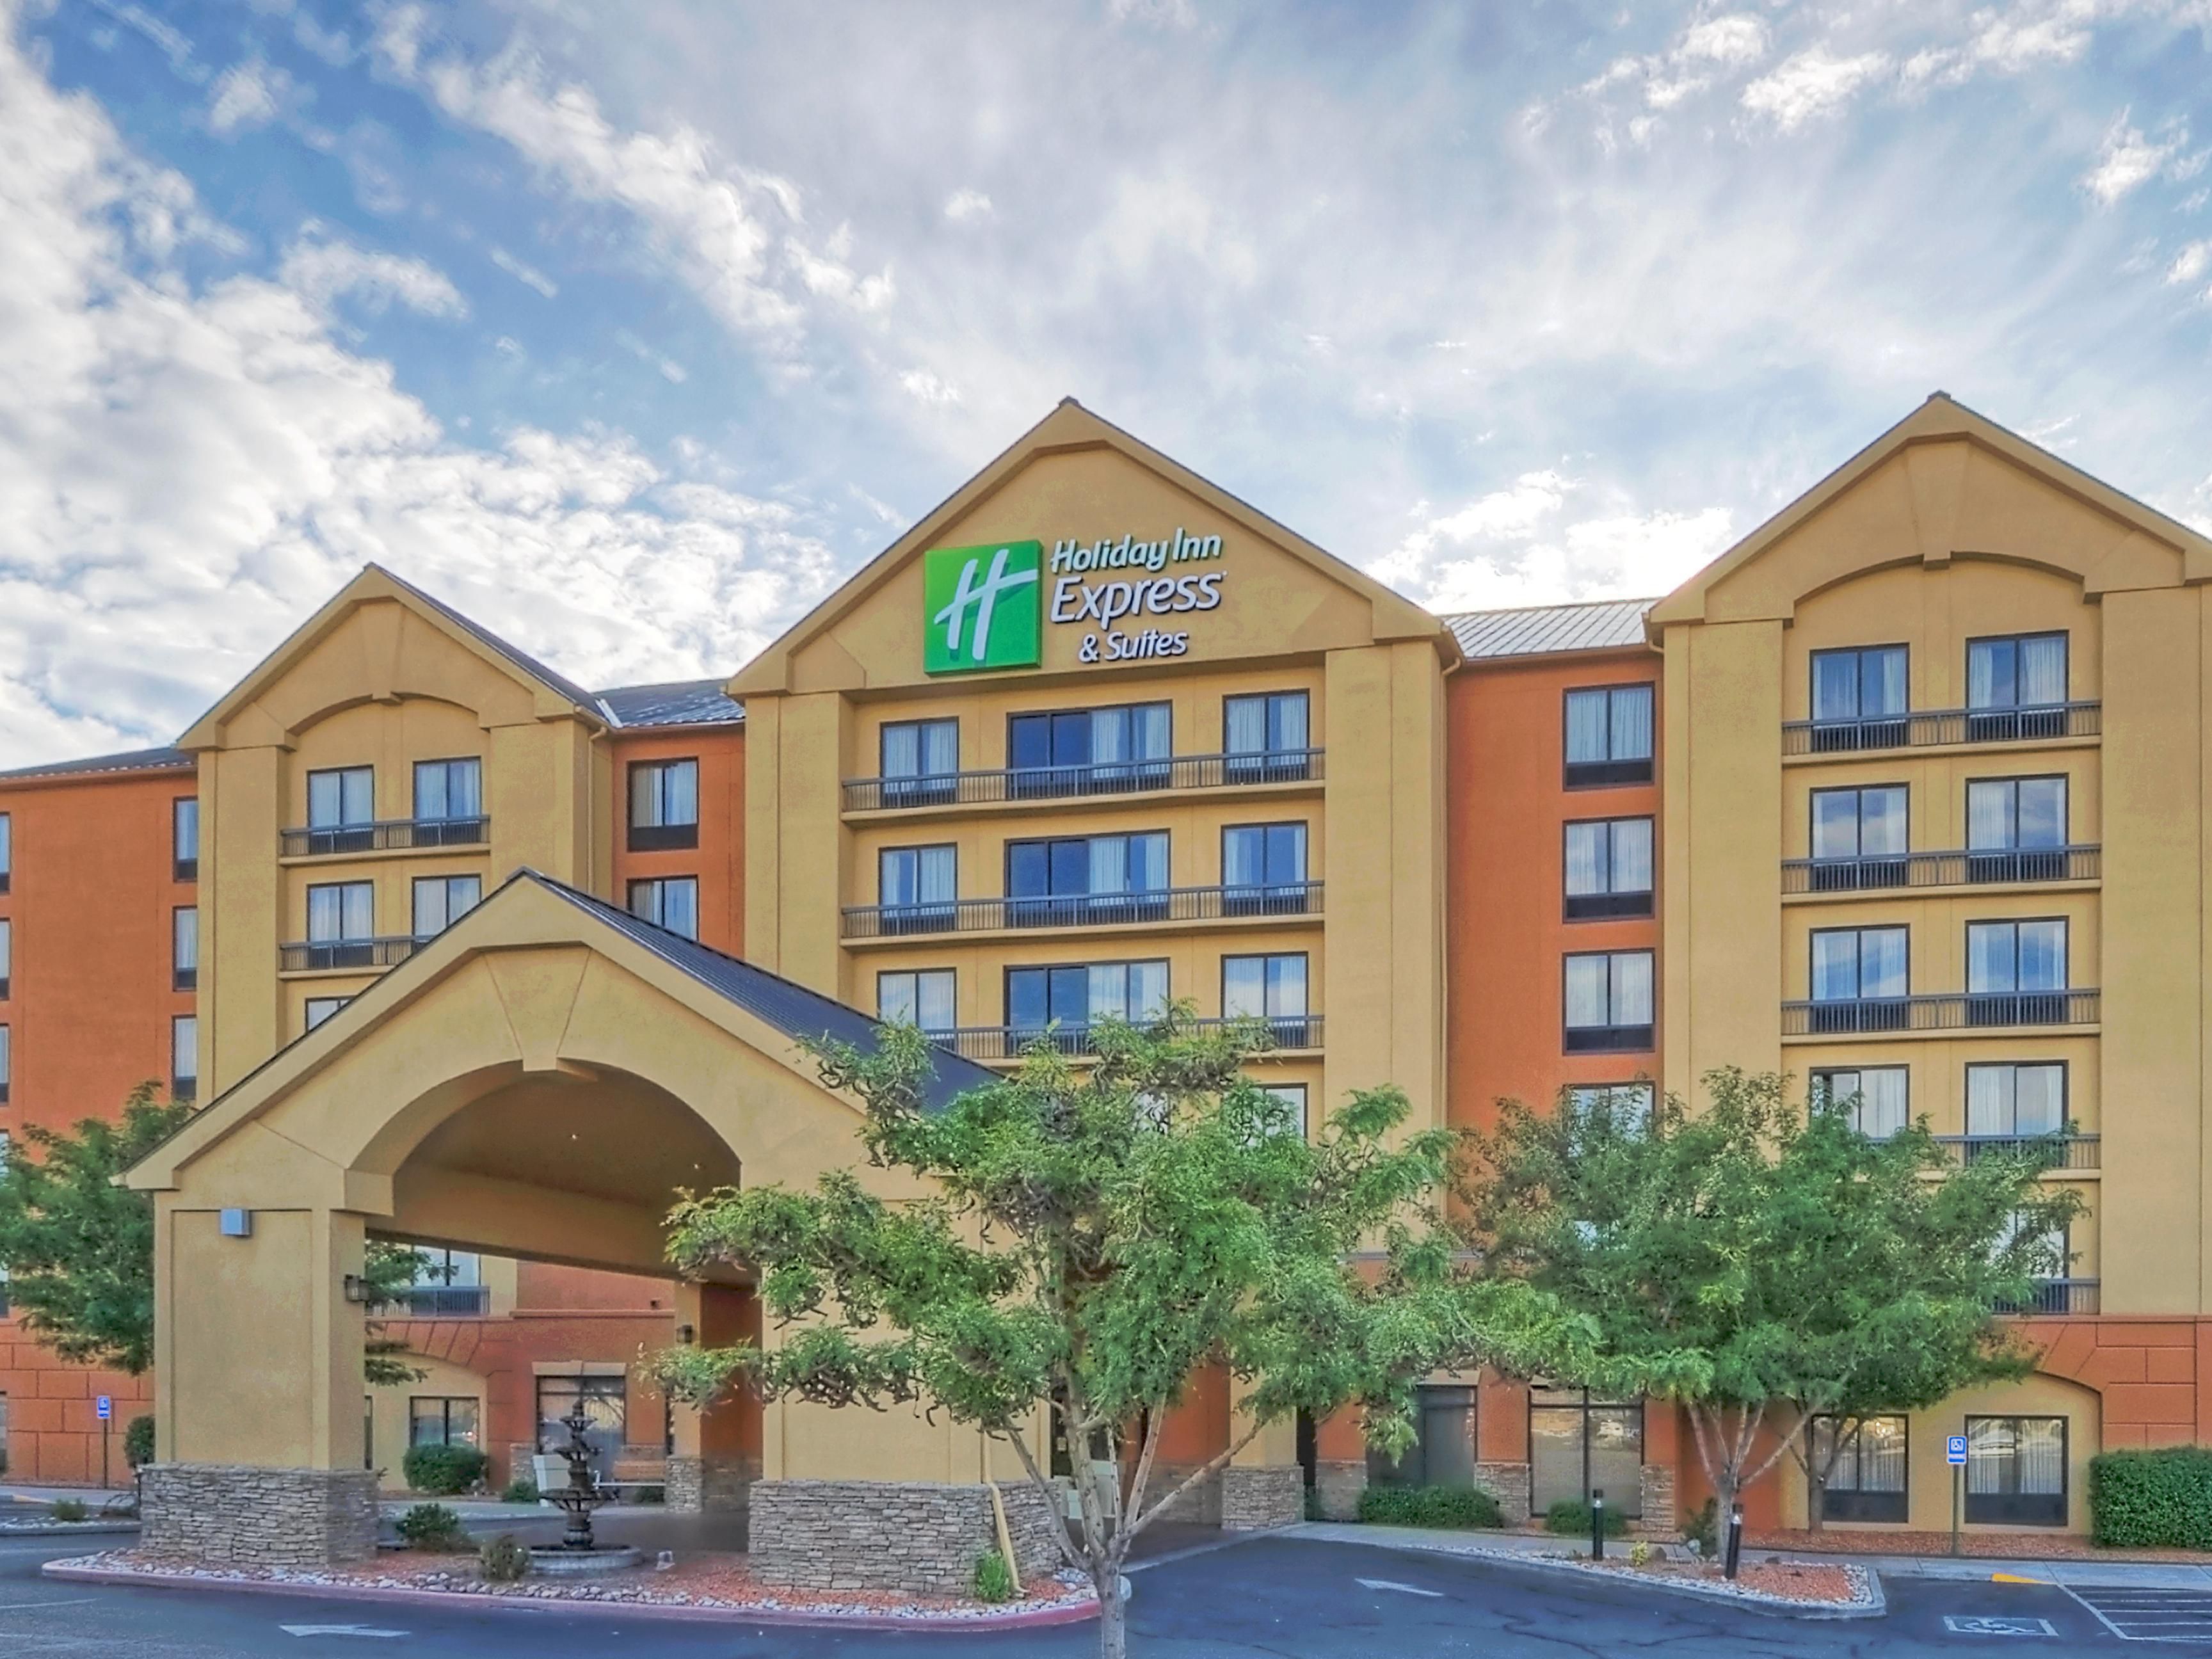 Holiday Inn Express And Suites Albuquerque 2531699329 4x3